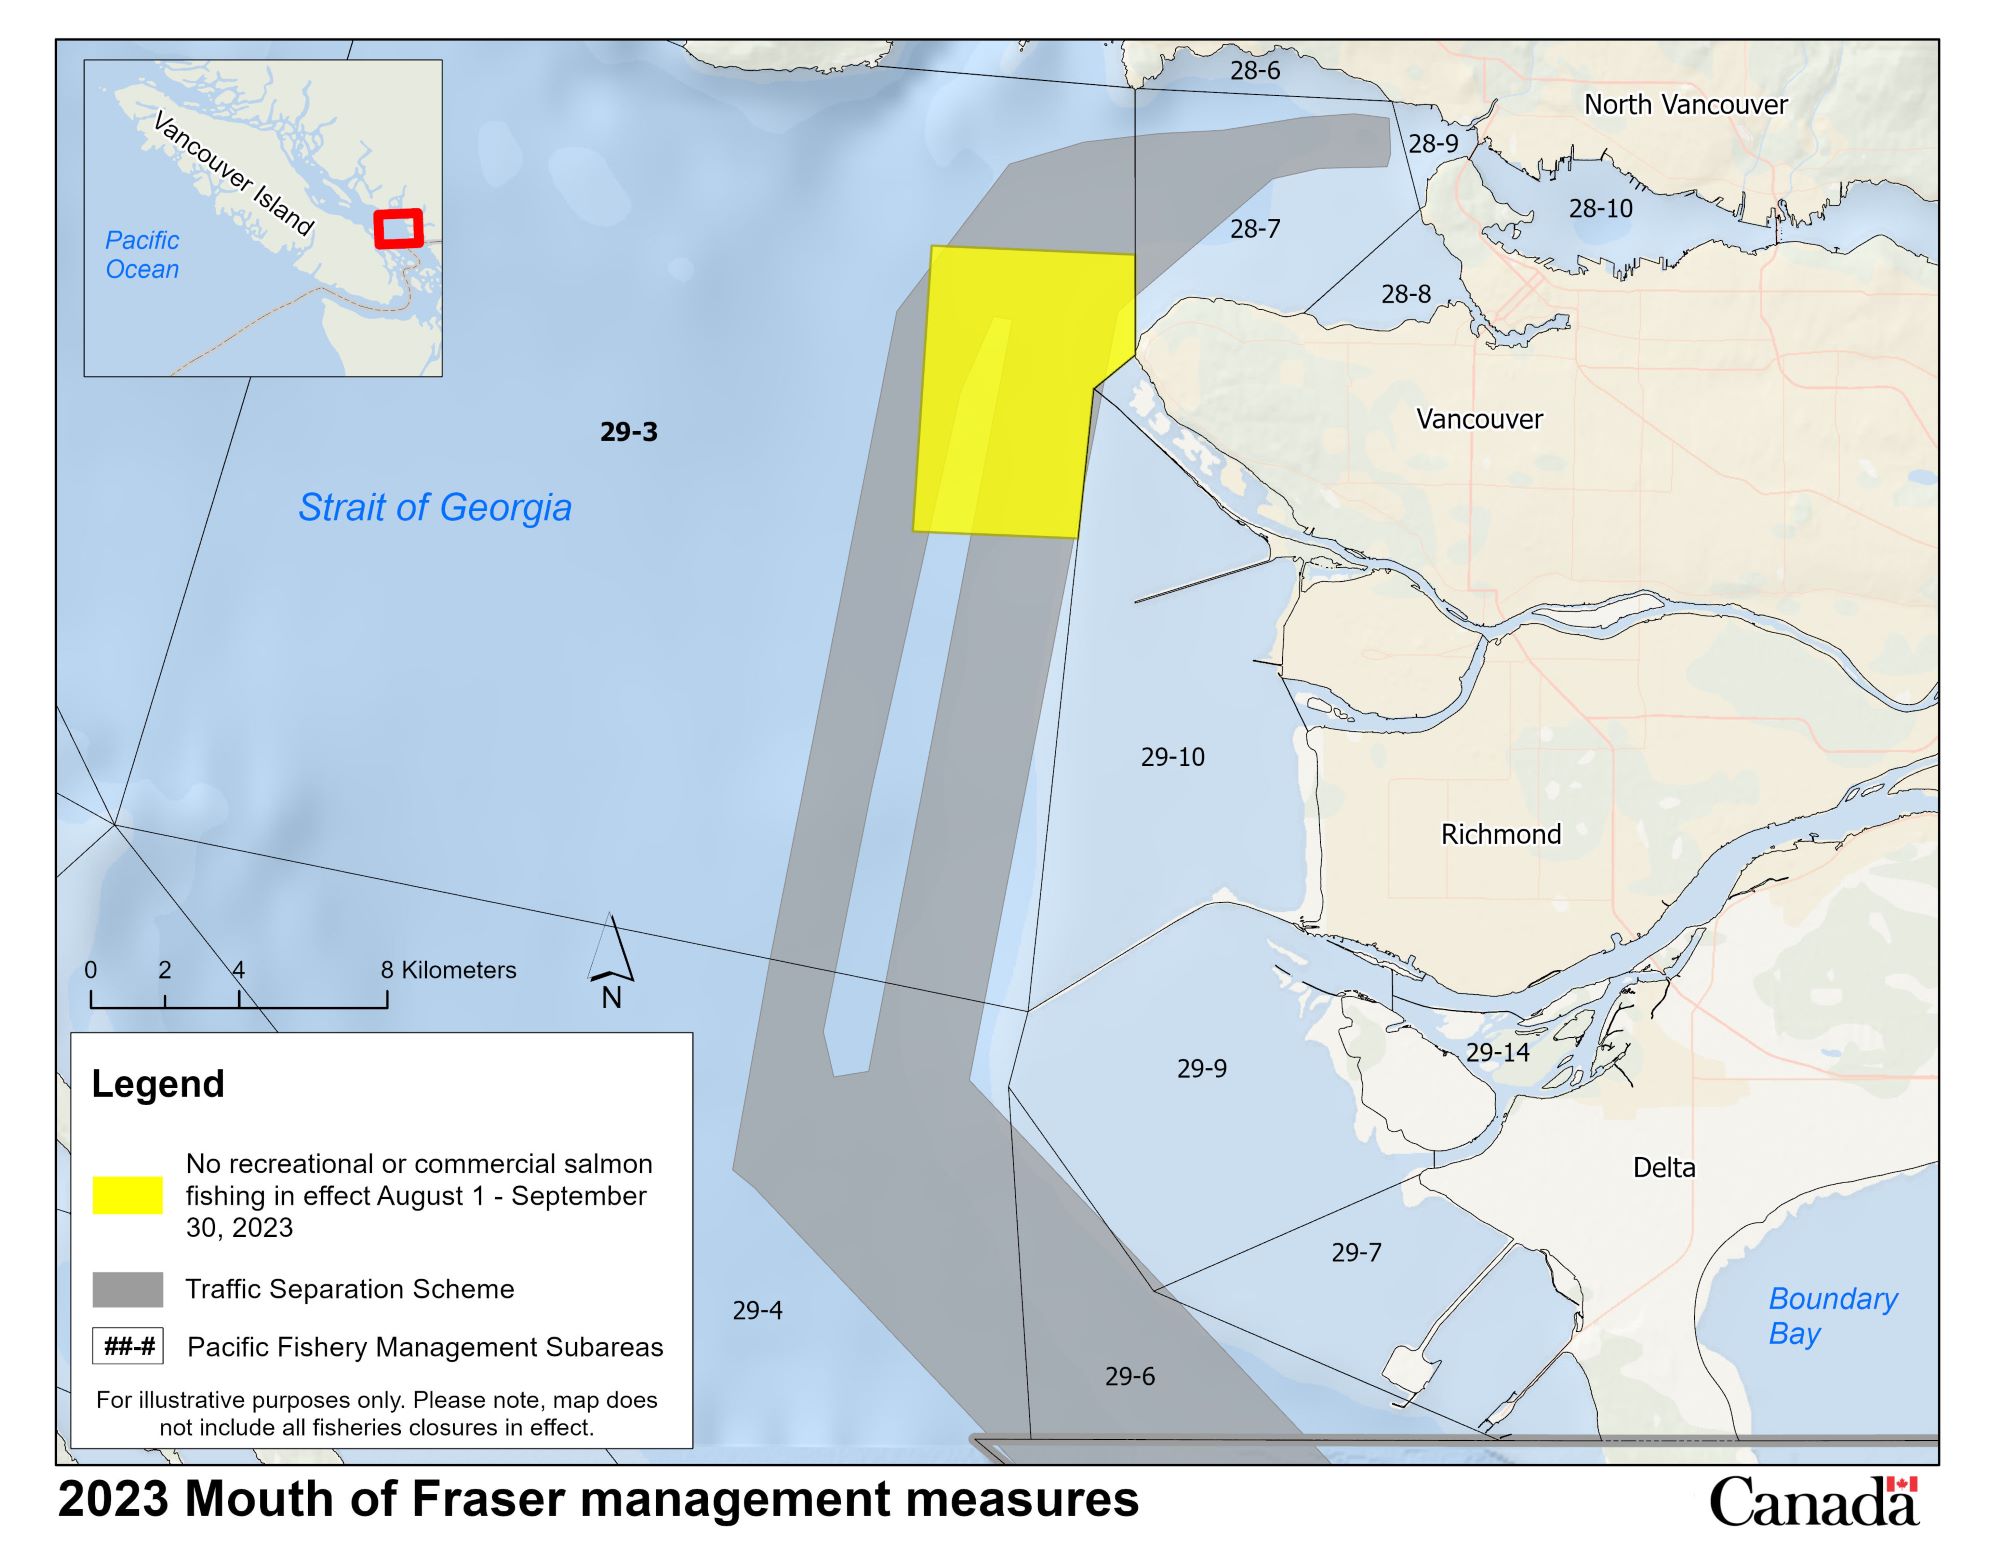 Map of management measures in the Fraser River Mouth to support Southern Resident killer whale recovery